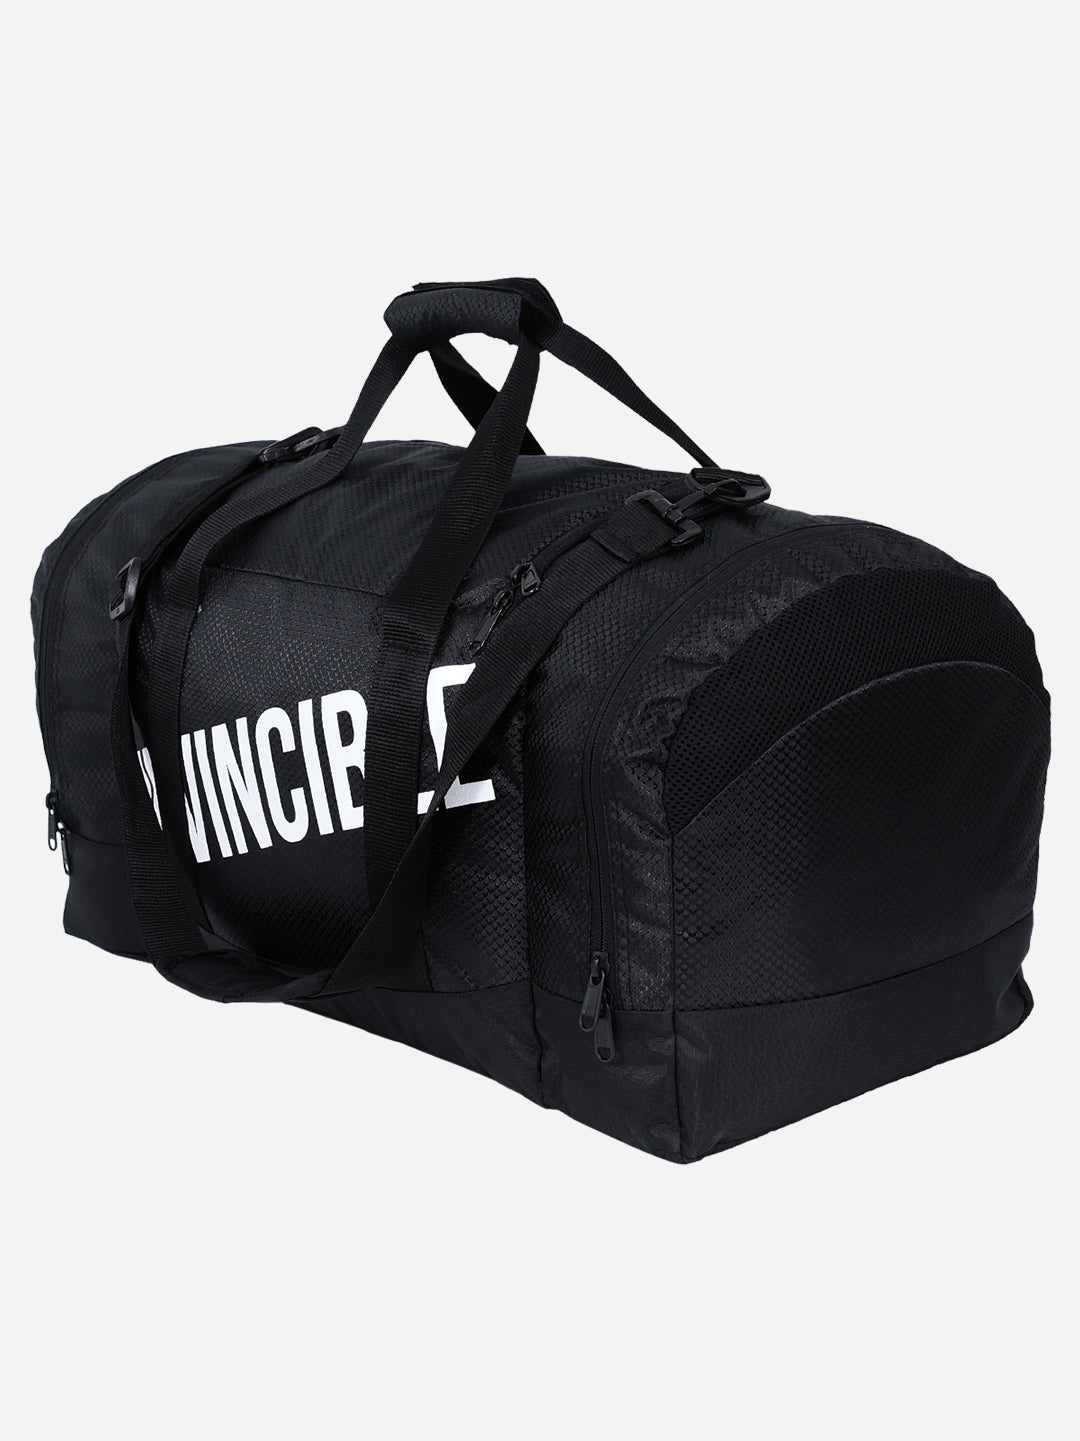 Invincible Team Sports Bag Polyester Dual Color 54 Ltrs